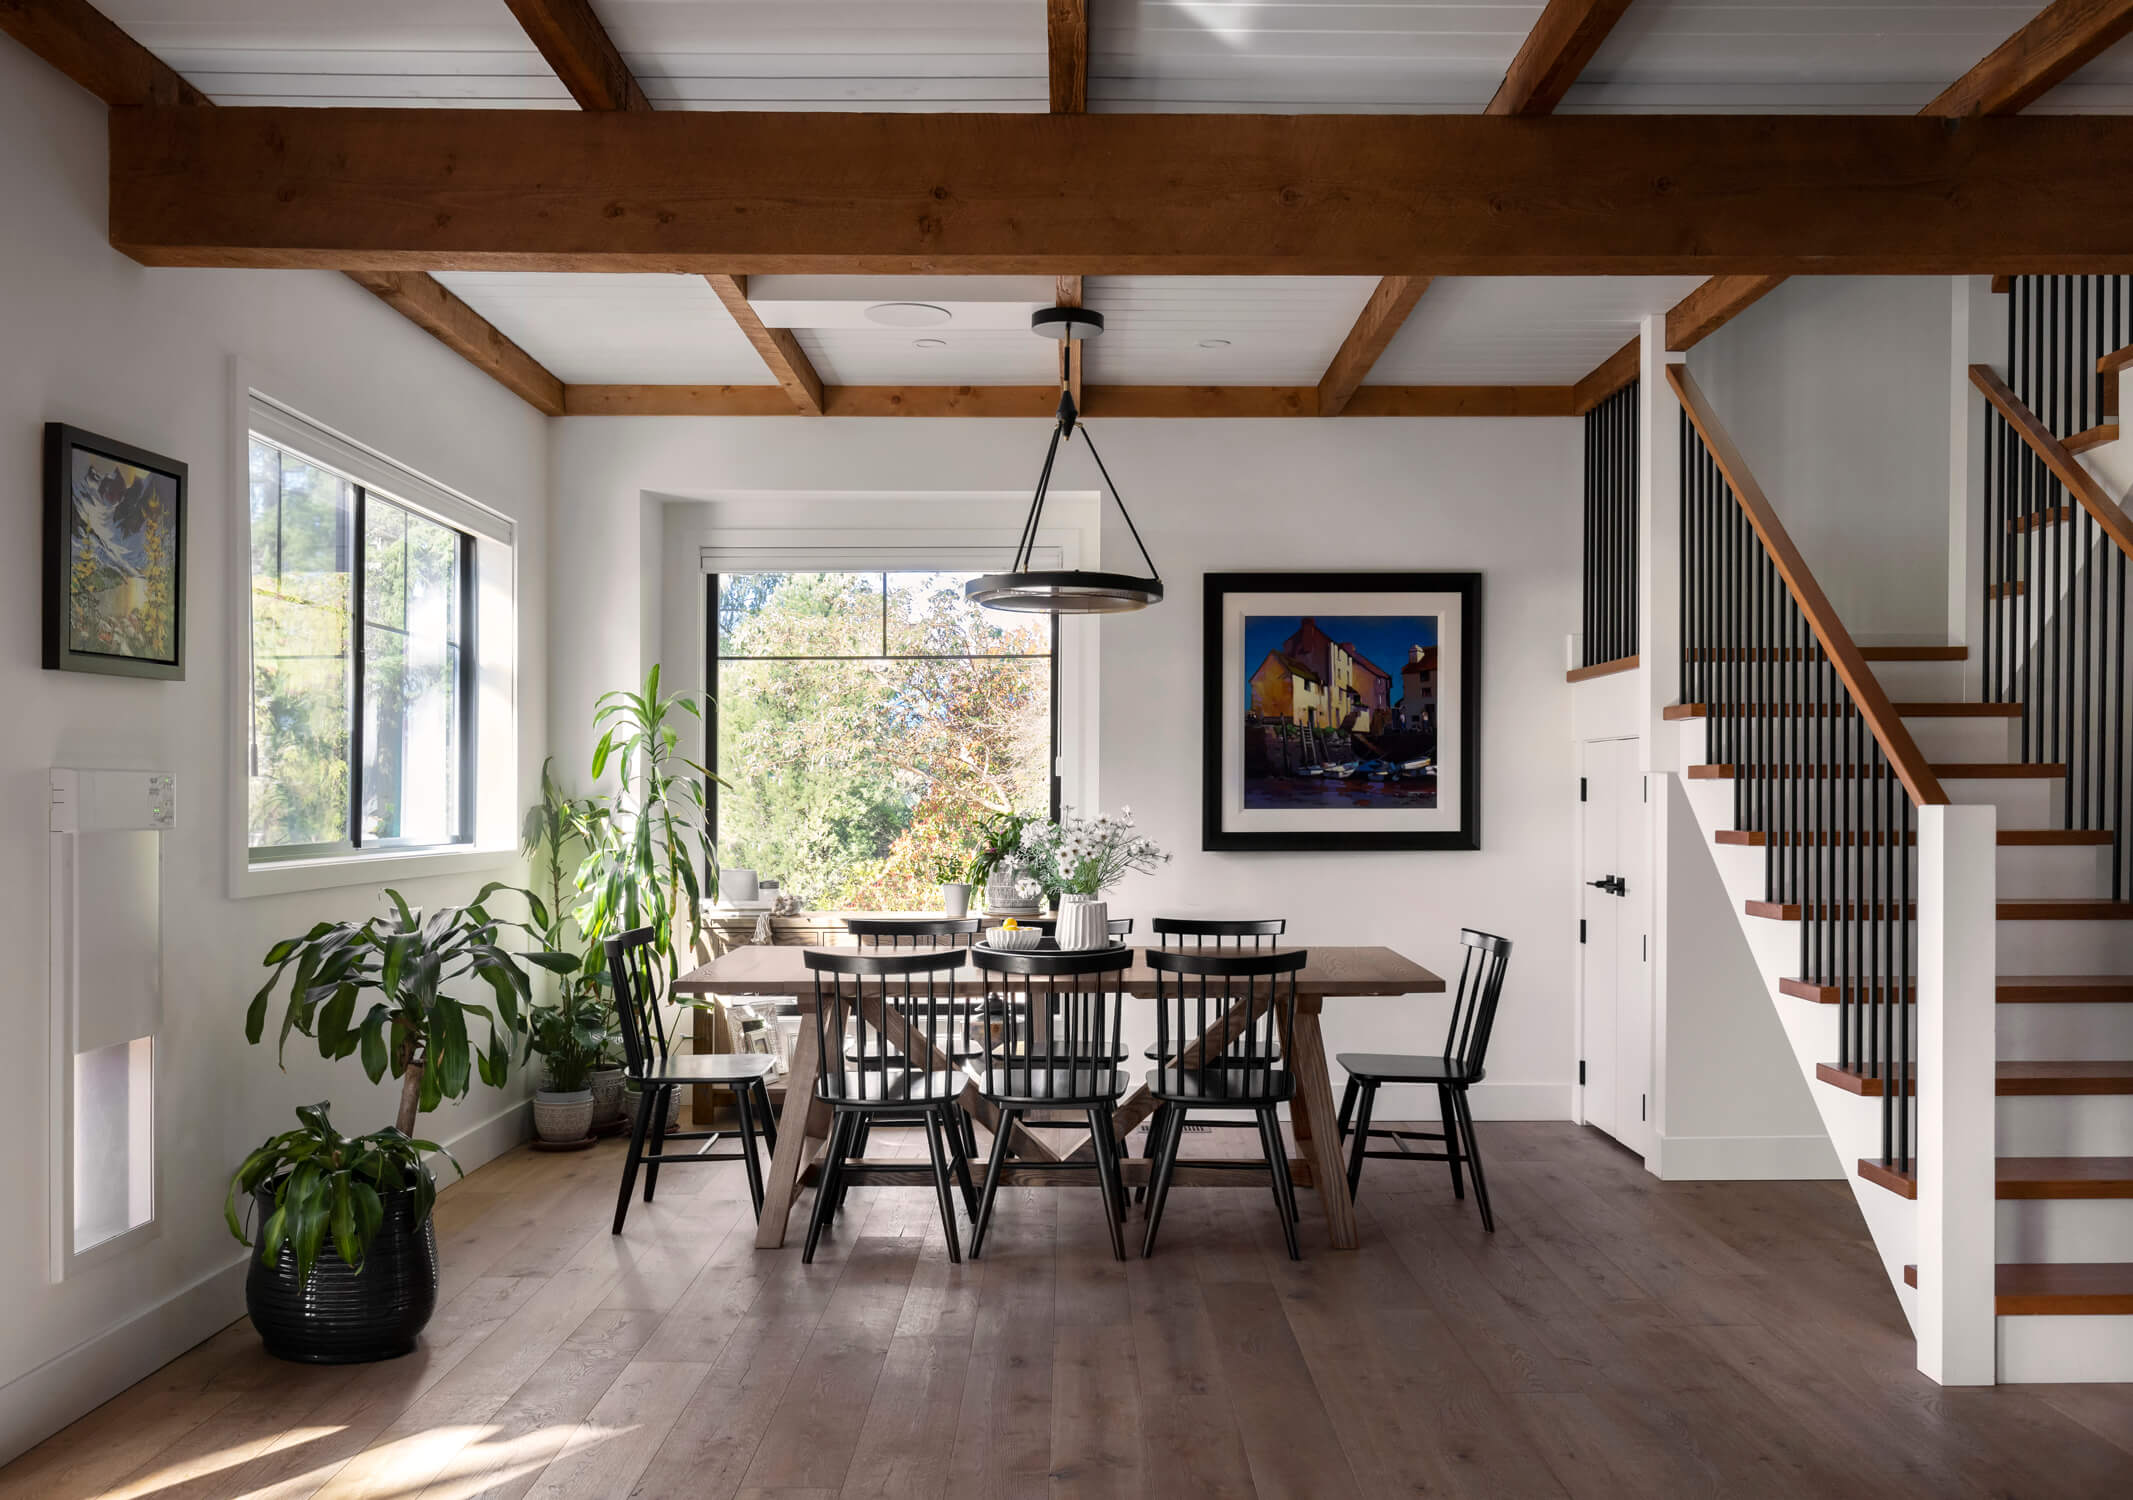 Reclaimed wooden beams line this modern farmhouse dining room area.